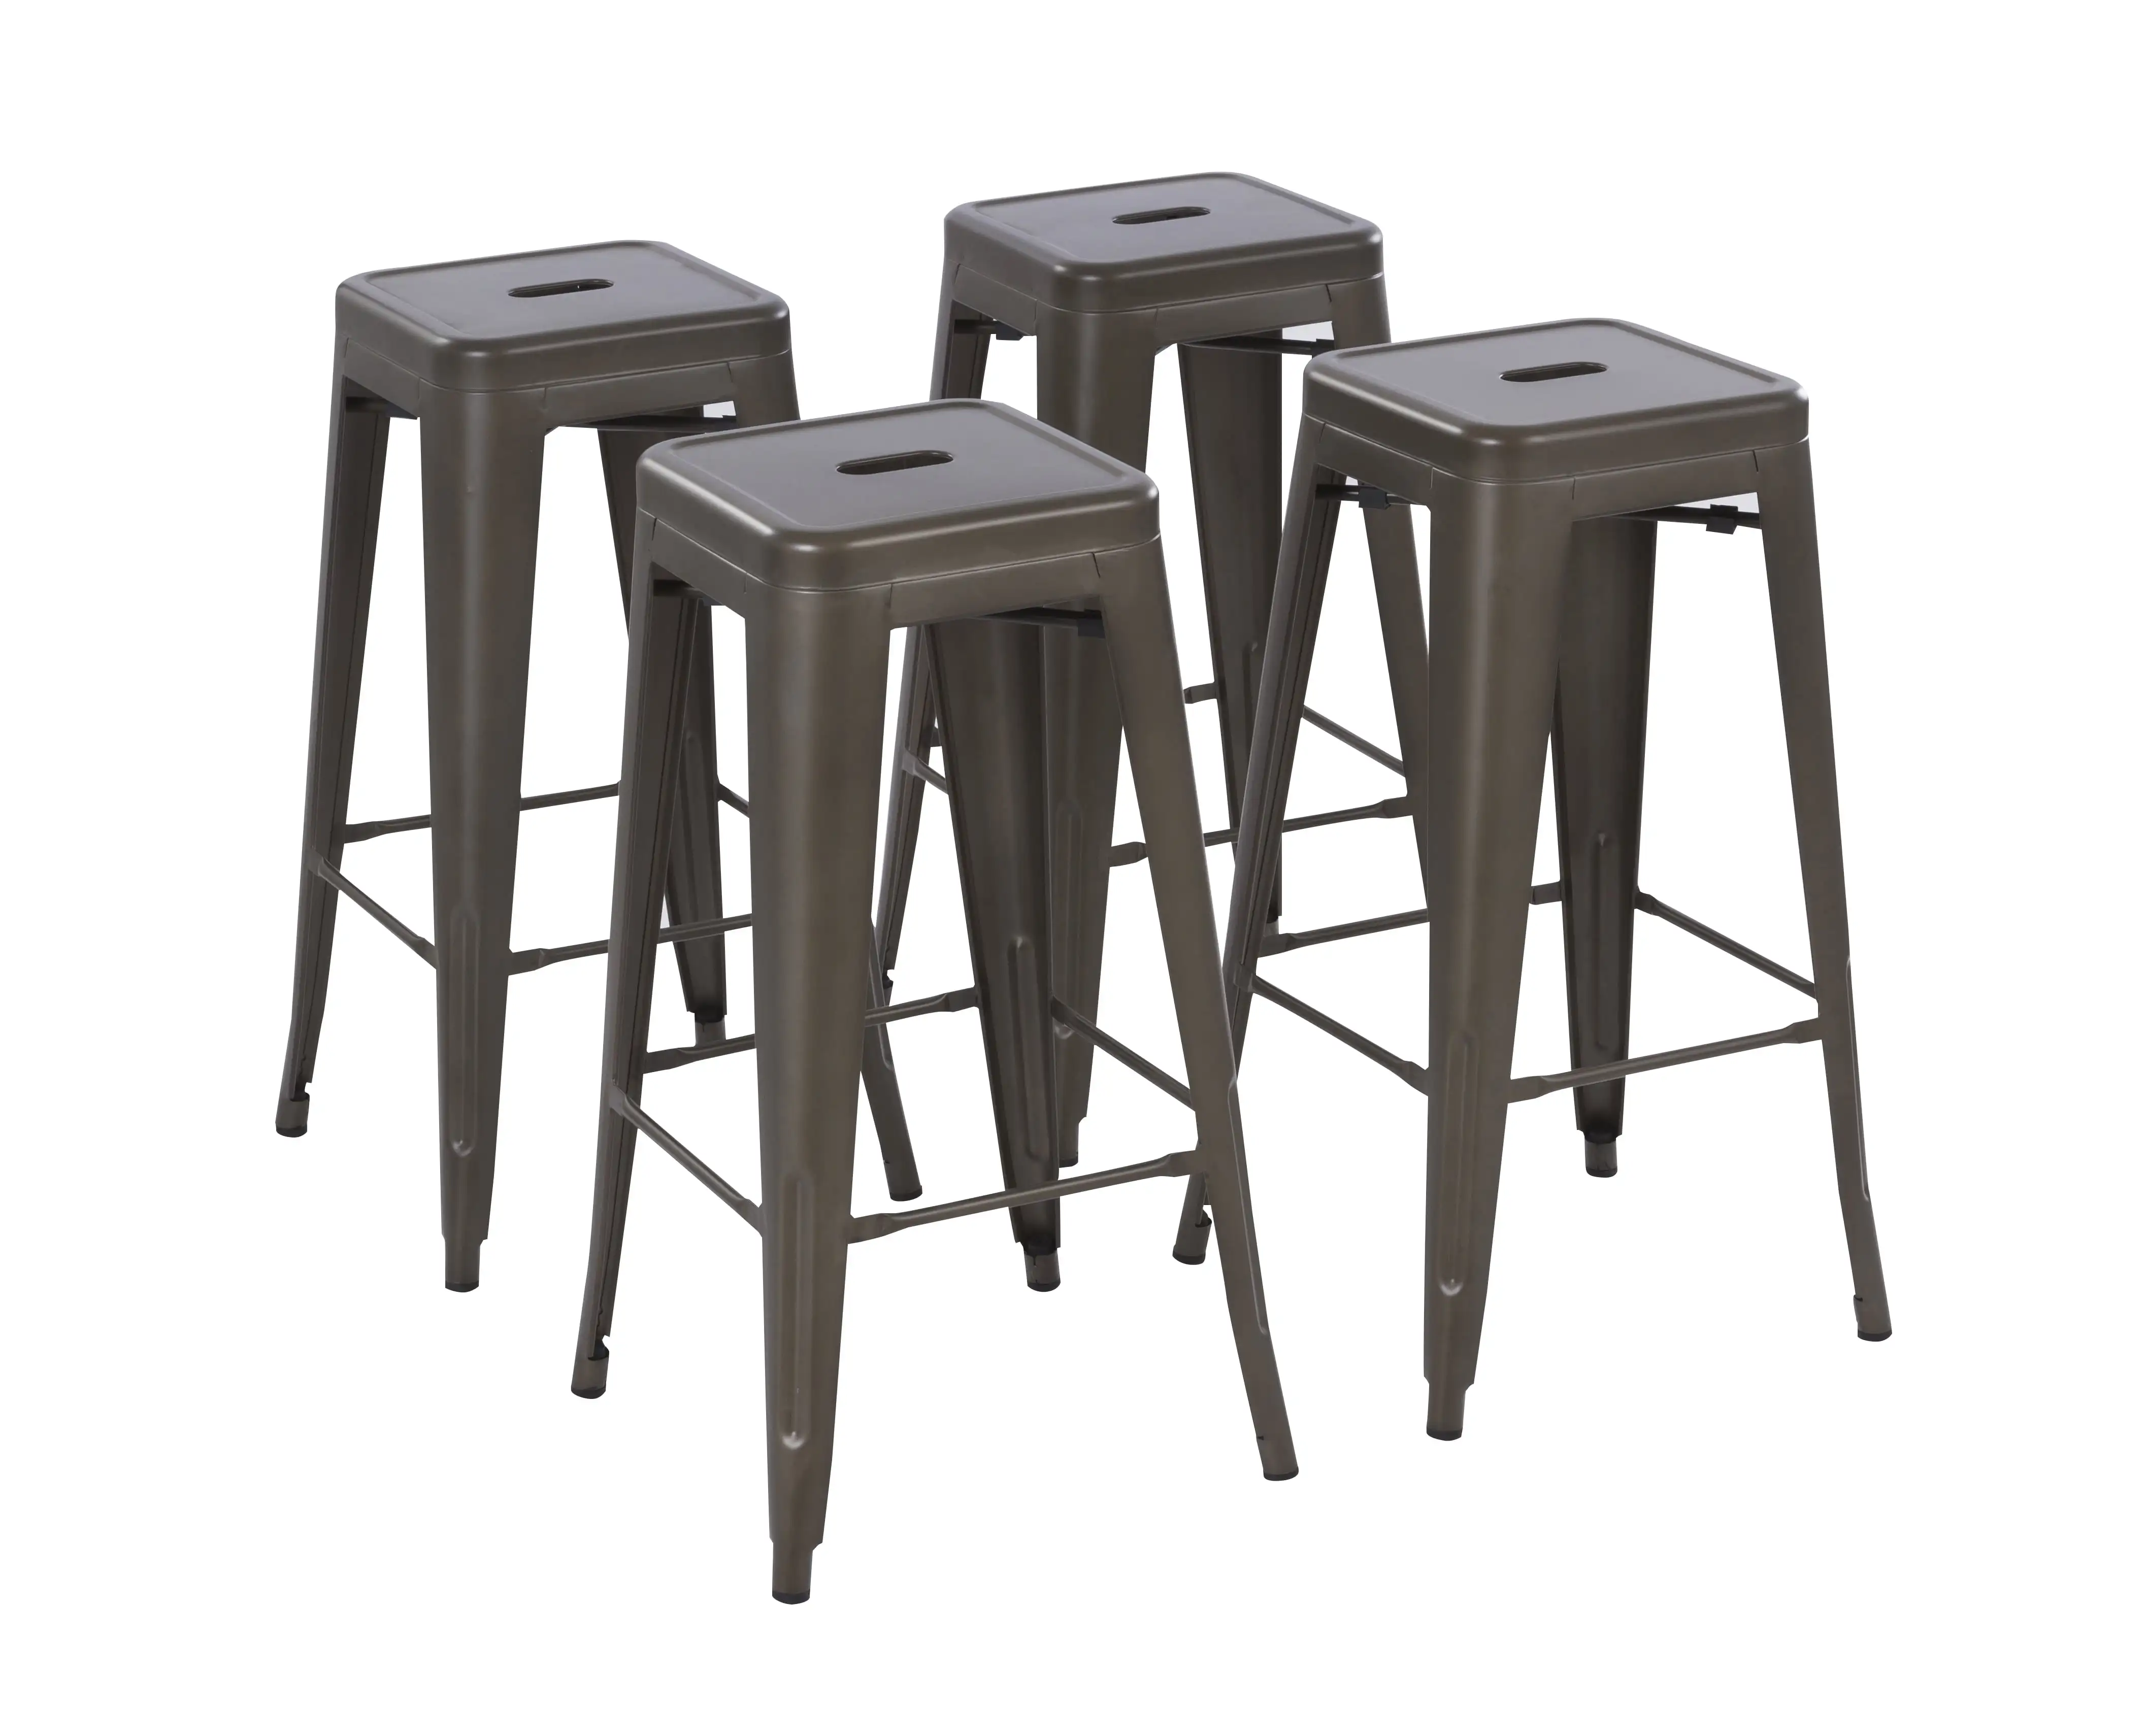 

Howard 30inch Stackable Metal Stool, Set of 4, Include 4 Stools Gunmetal Color, 17"(L) x 17"(W) x 30"(H) Backless Style